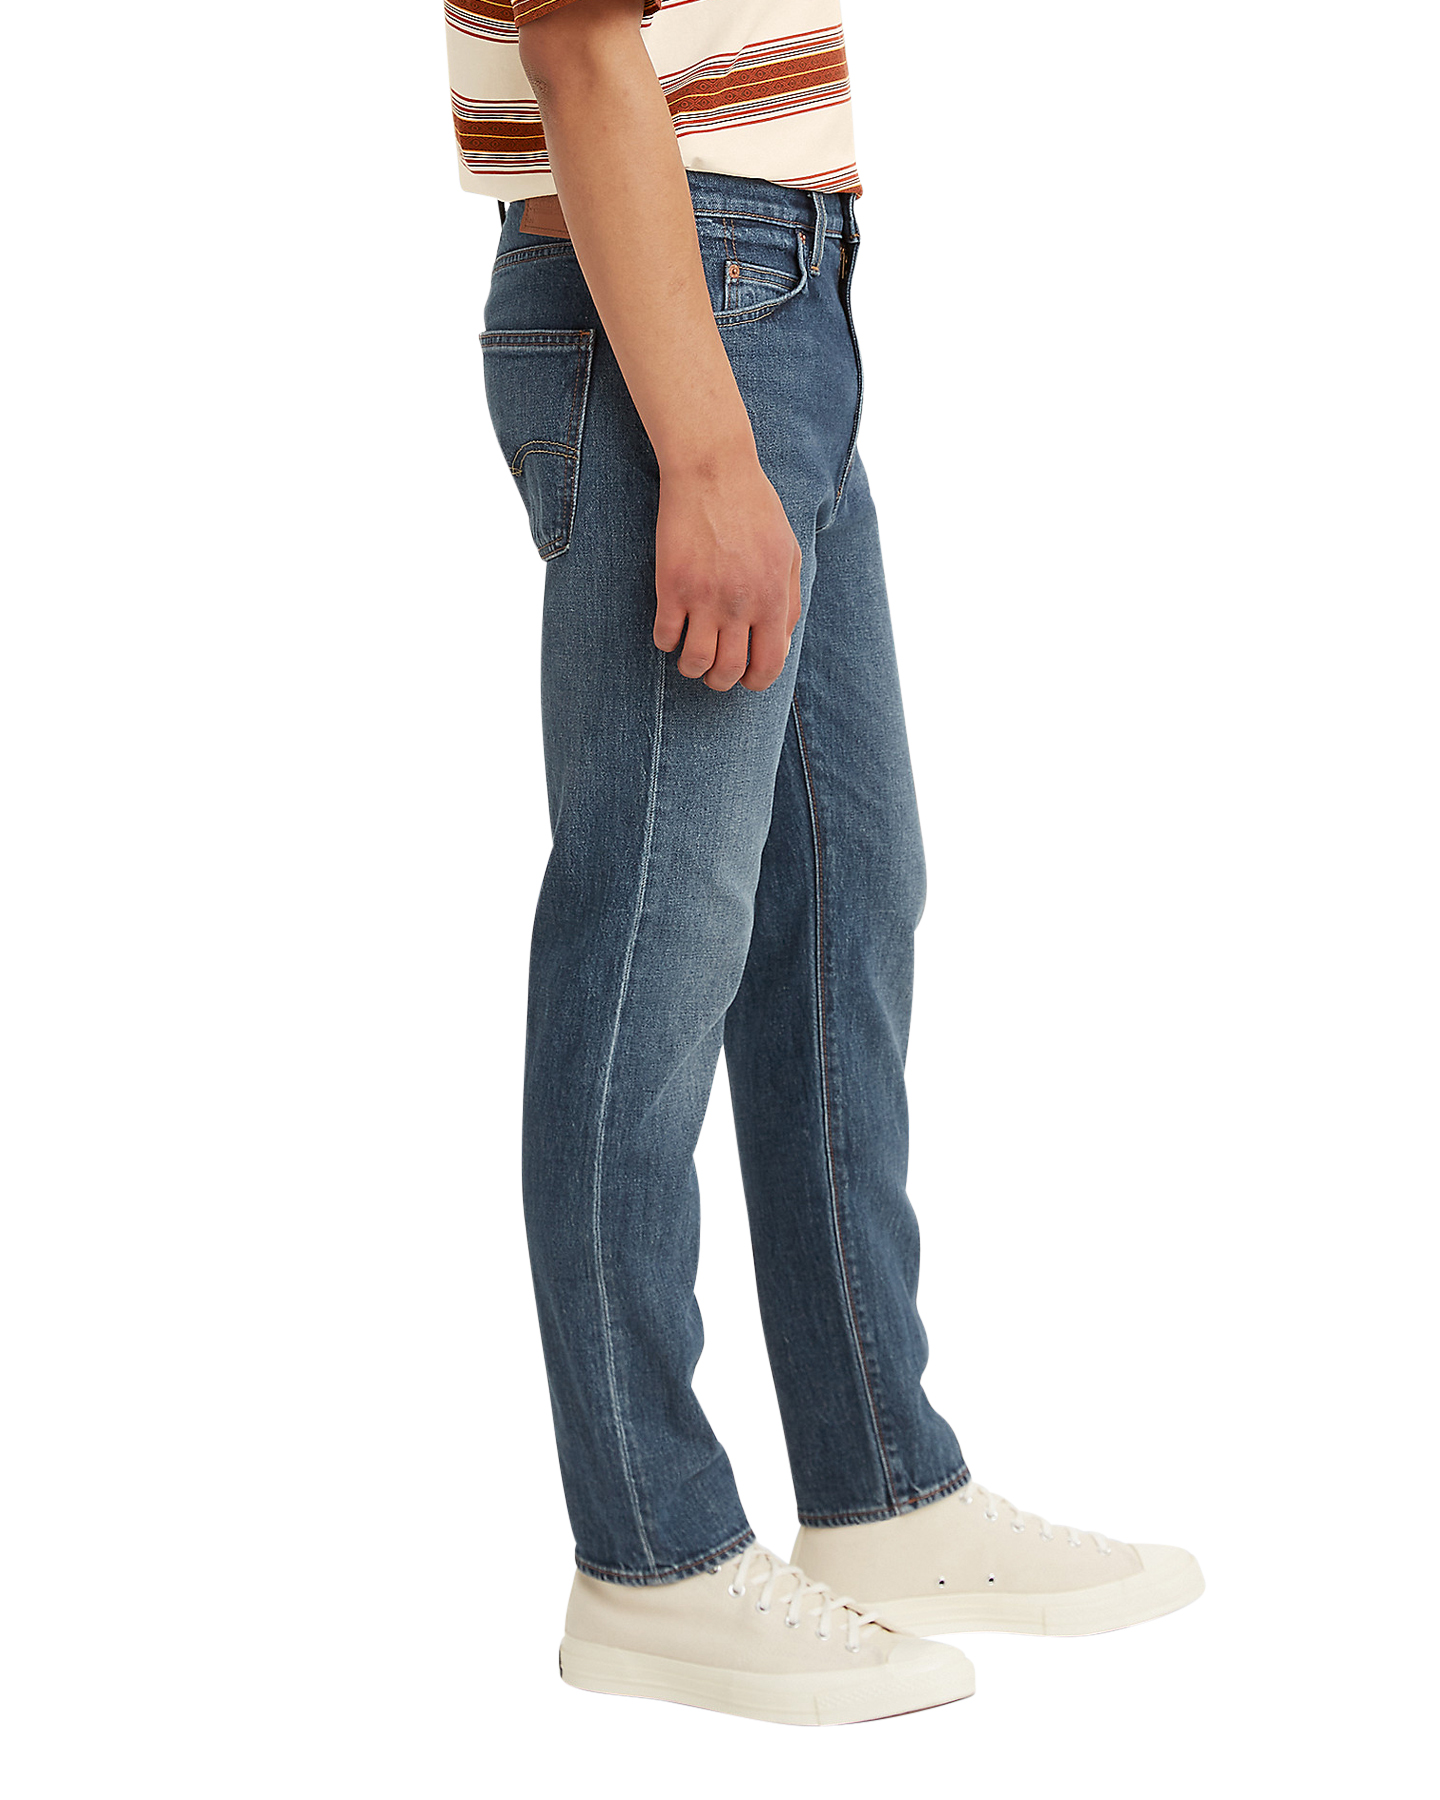 Levi's So High Slim Fit Jeans - Day In Cali | SurfStitch